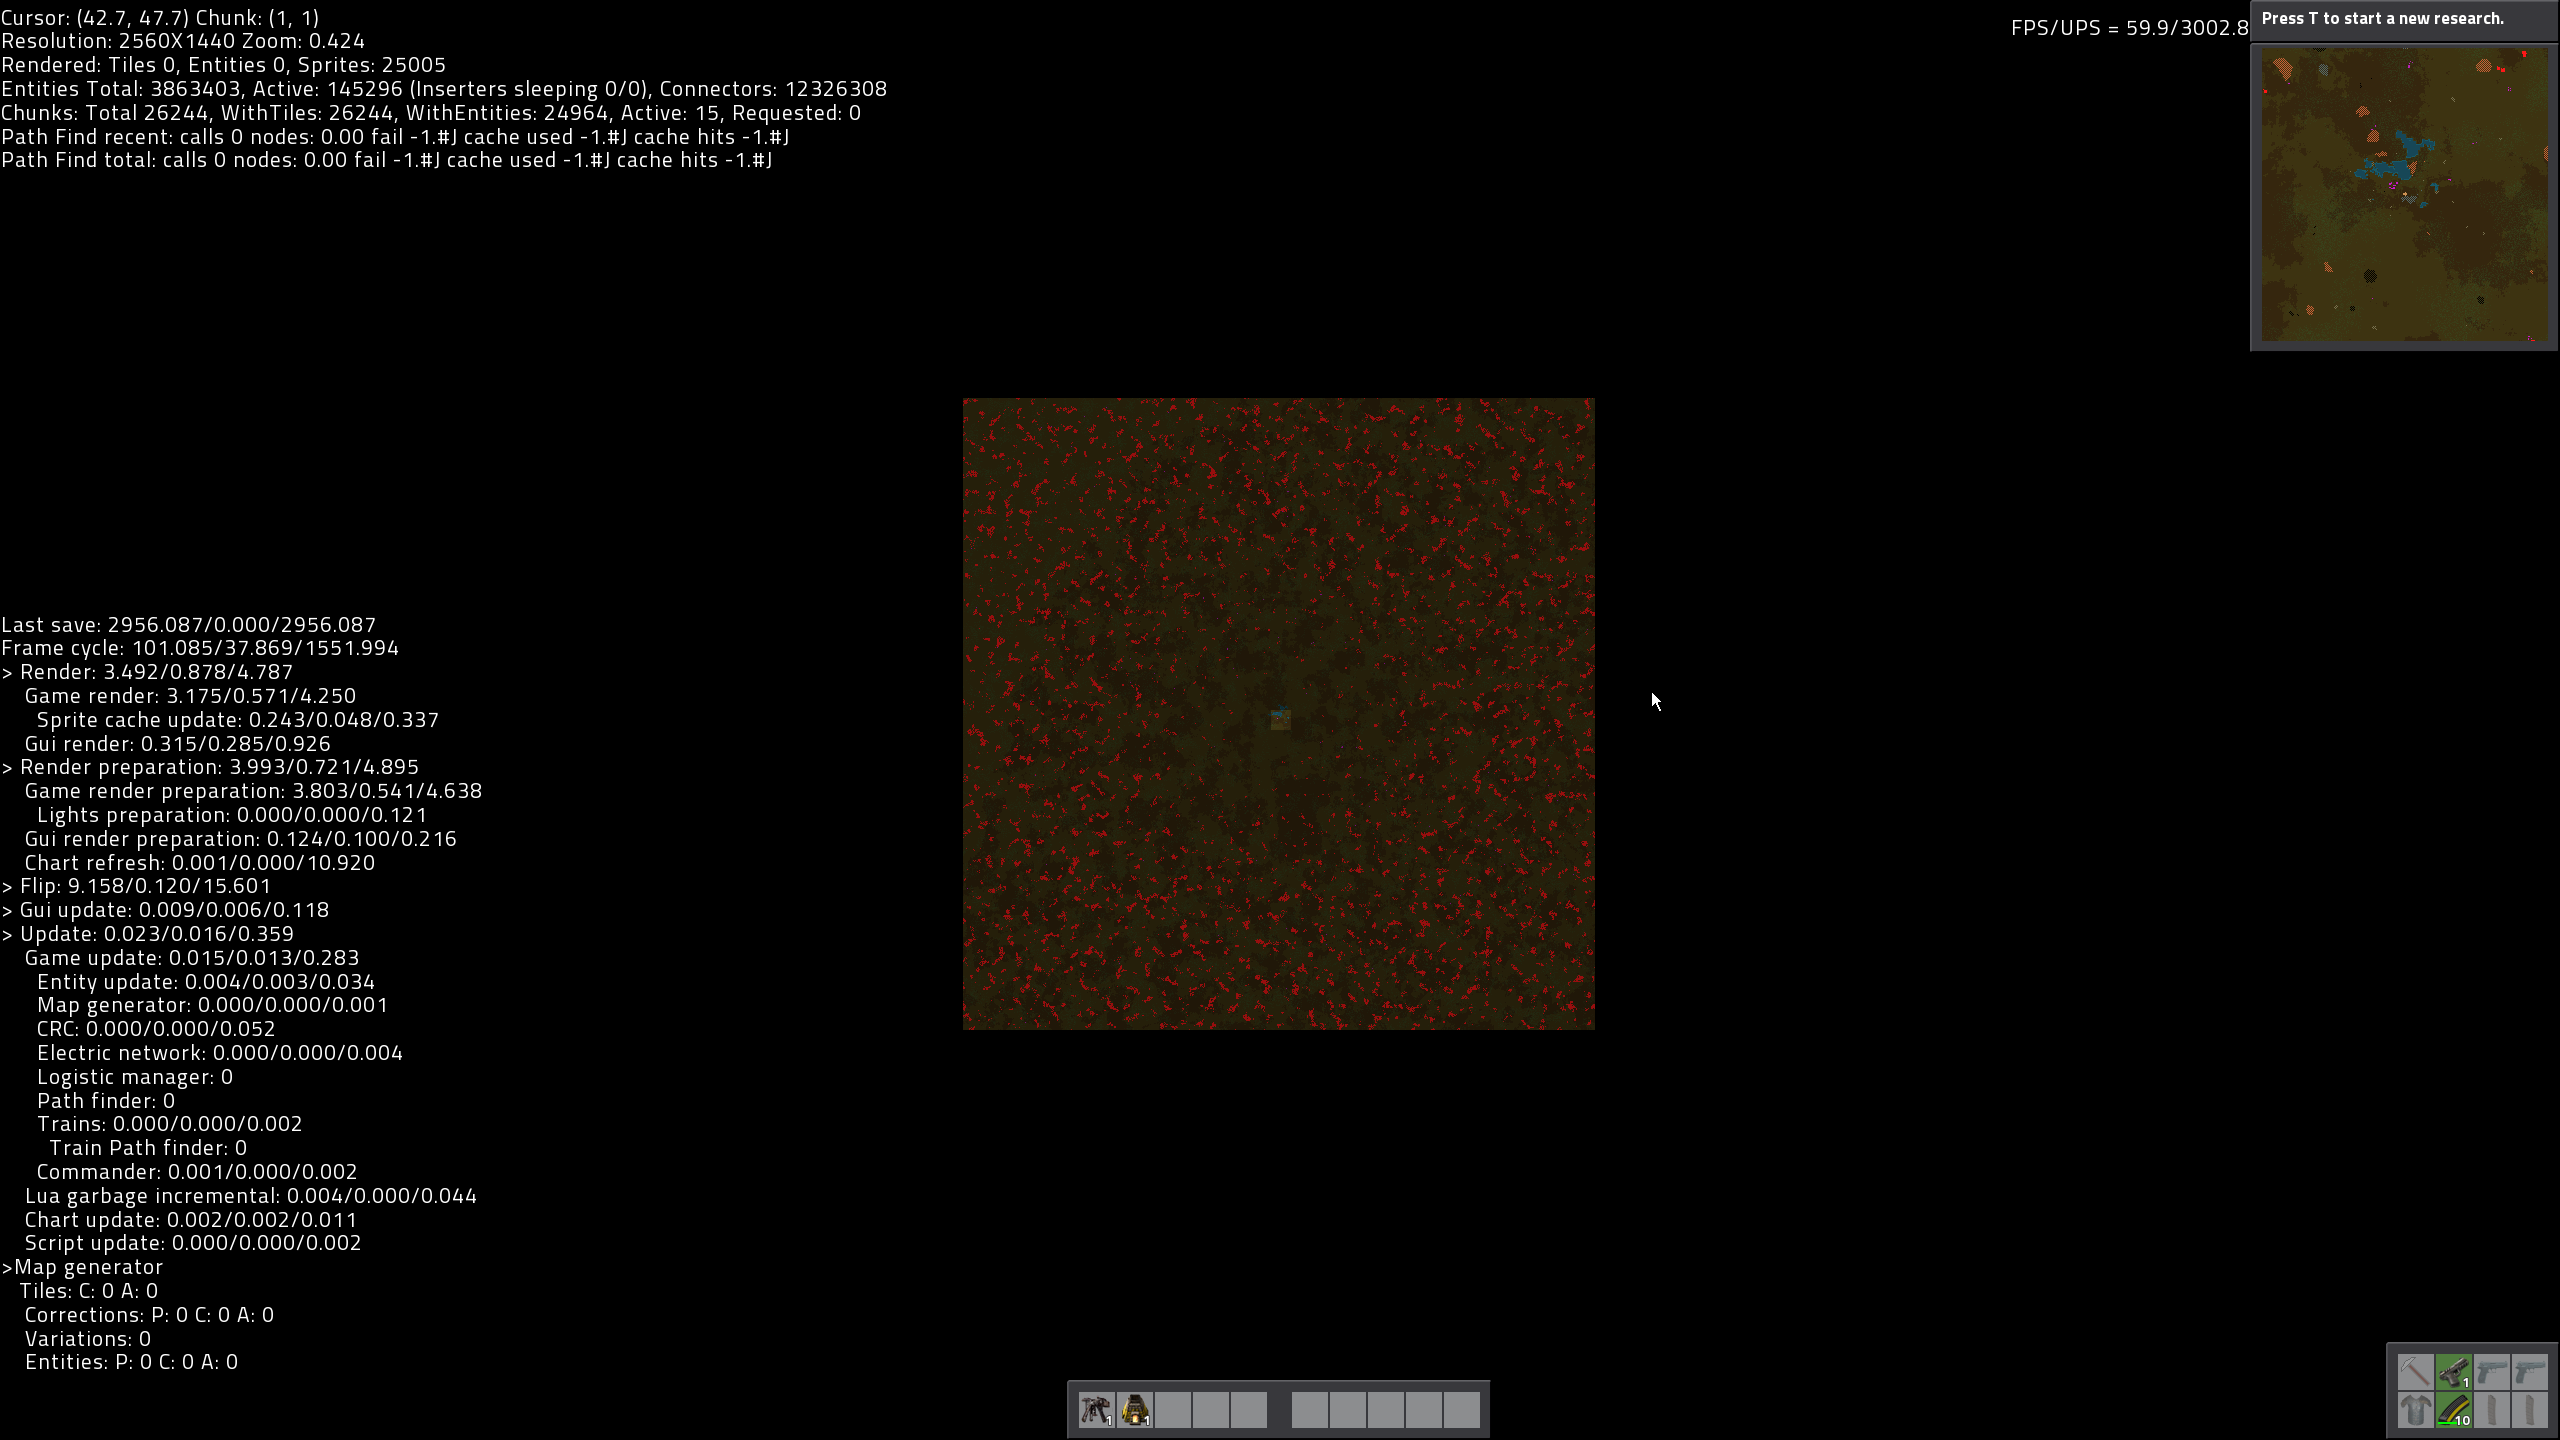 0.12.35 - 26,244 chunks - 3,800,000 entities, this was made with RSO mod and modified RSO config to make insane amount of resources, one tile of ore 500,000